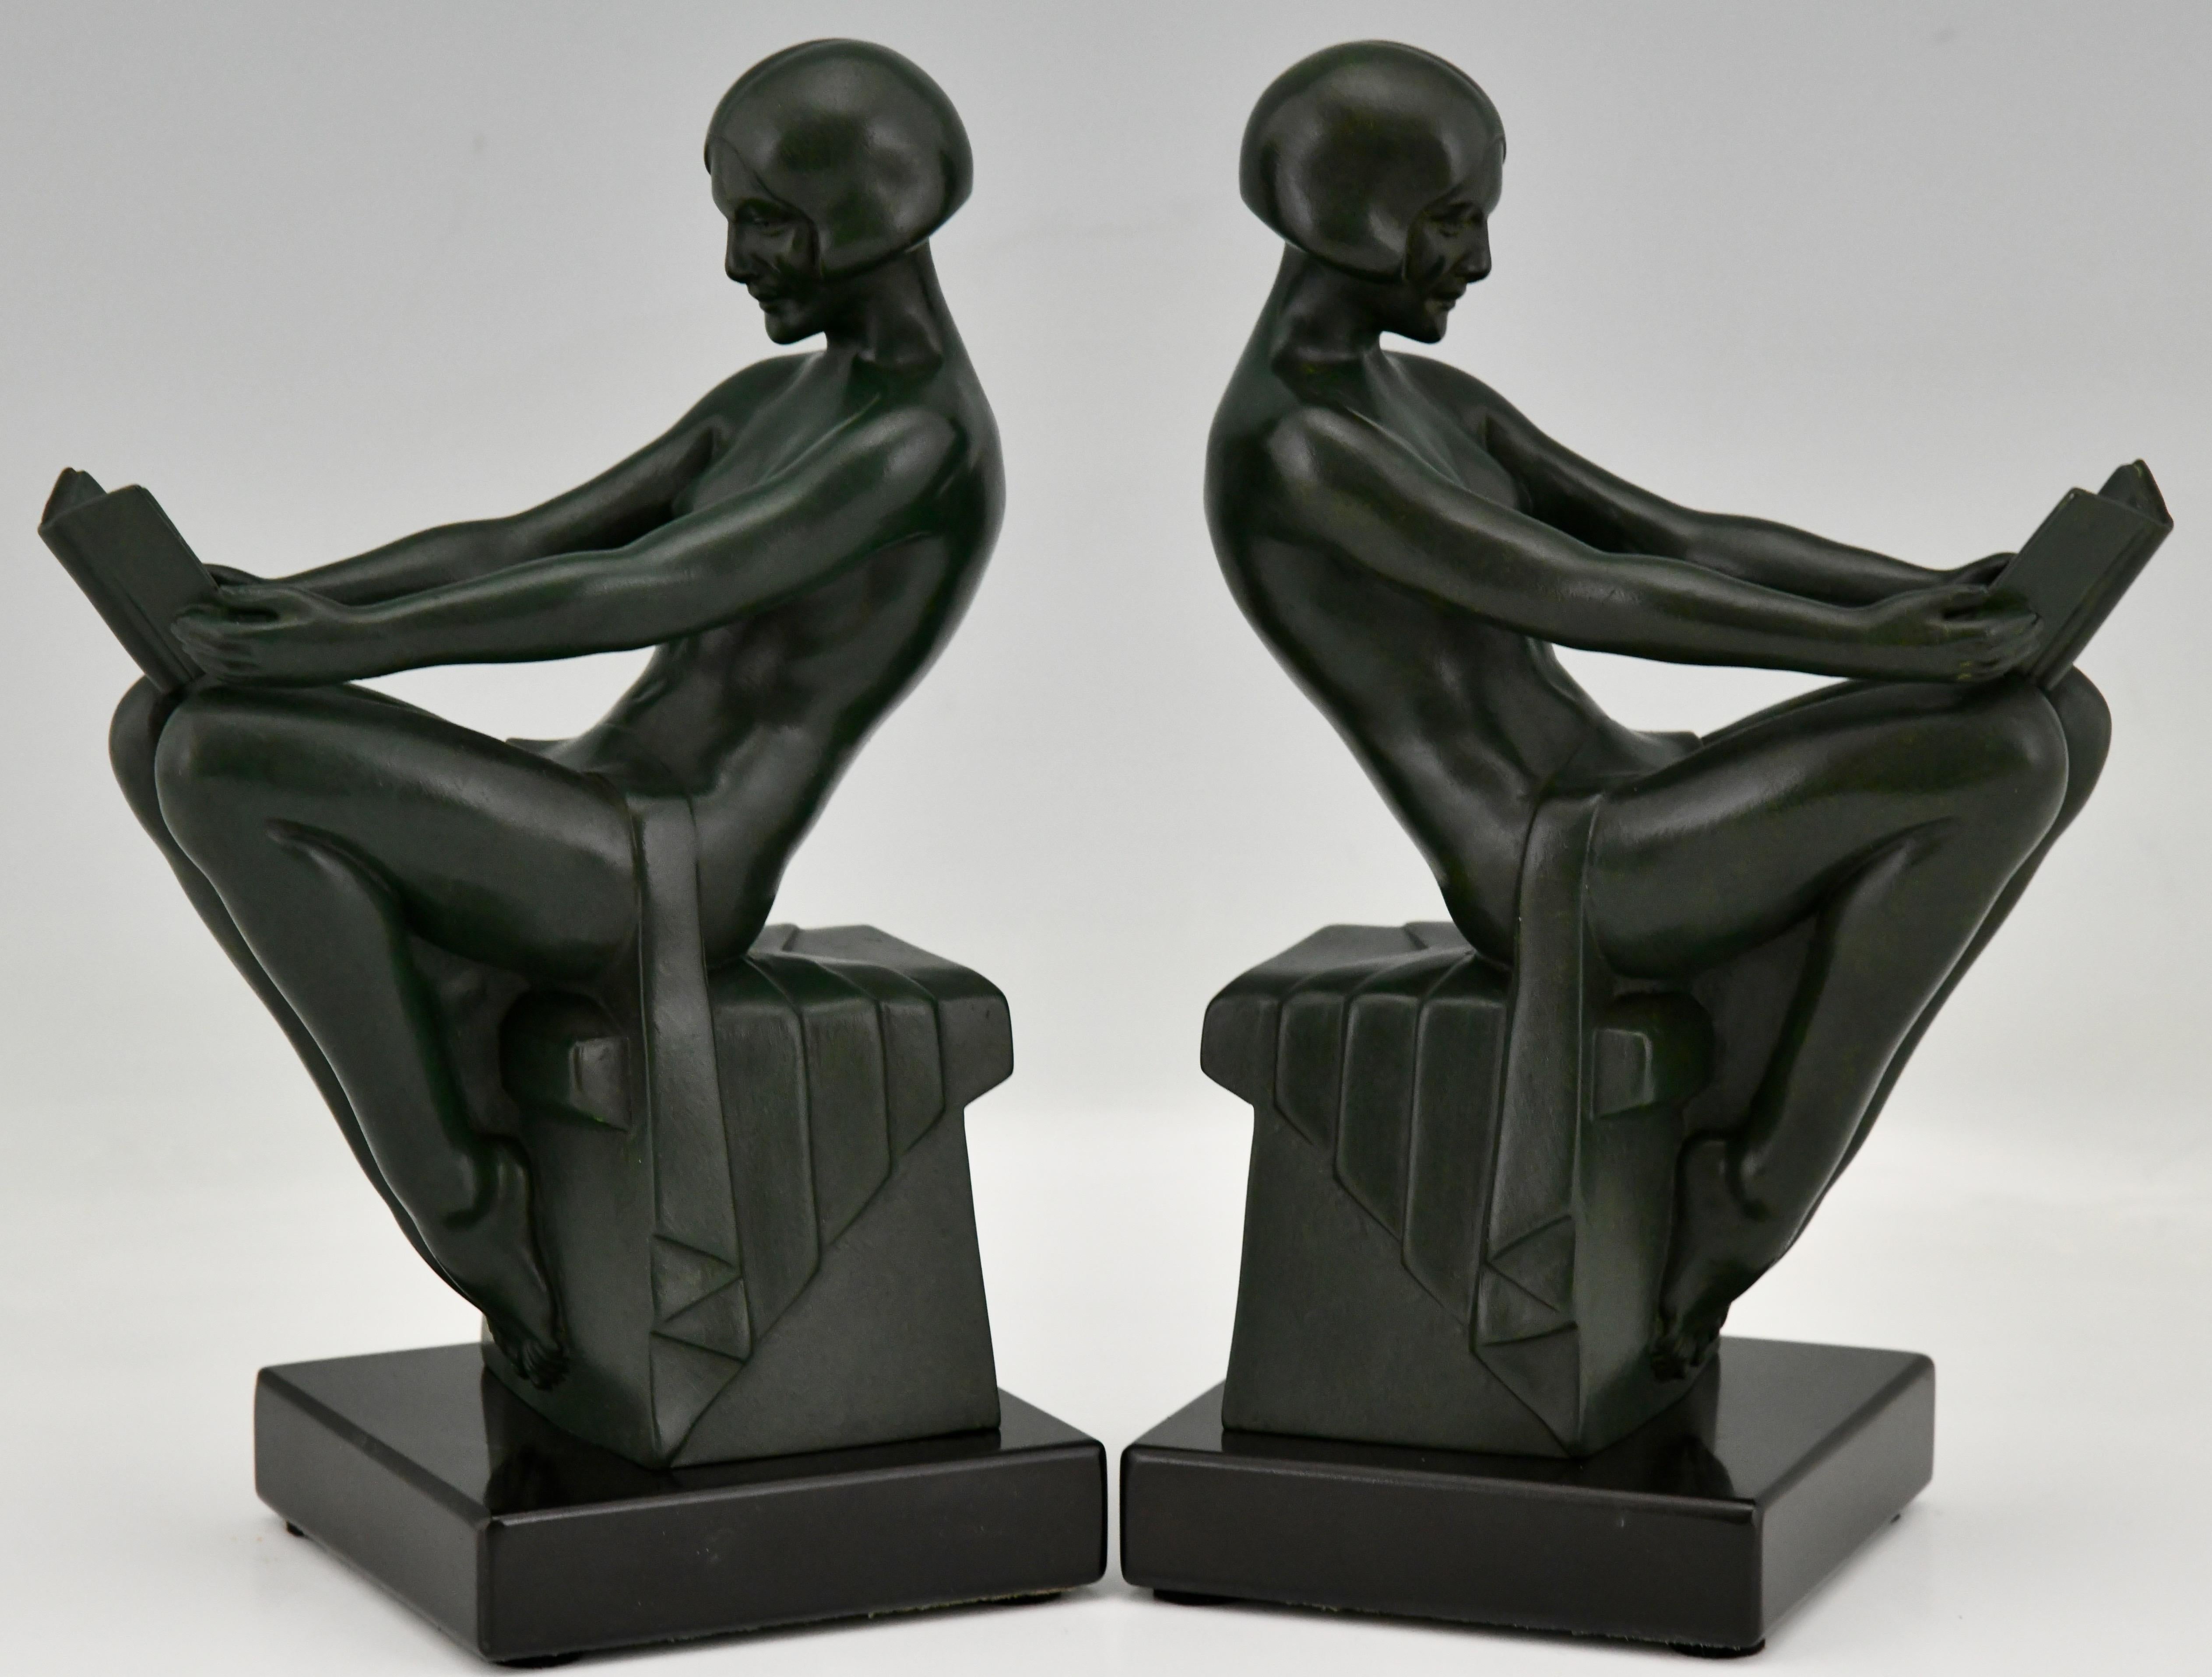 Art Deco bookends with reading nudes Delassement by Max Le Verrier.
Patinated Art Metal on black marble base.
France ca. 1930.

Literature:
Statuettes of the Art Deco period by Alberto Shayo.
Art Deco sculpture by Victor Arwas,